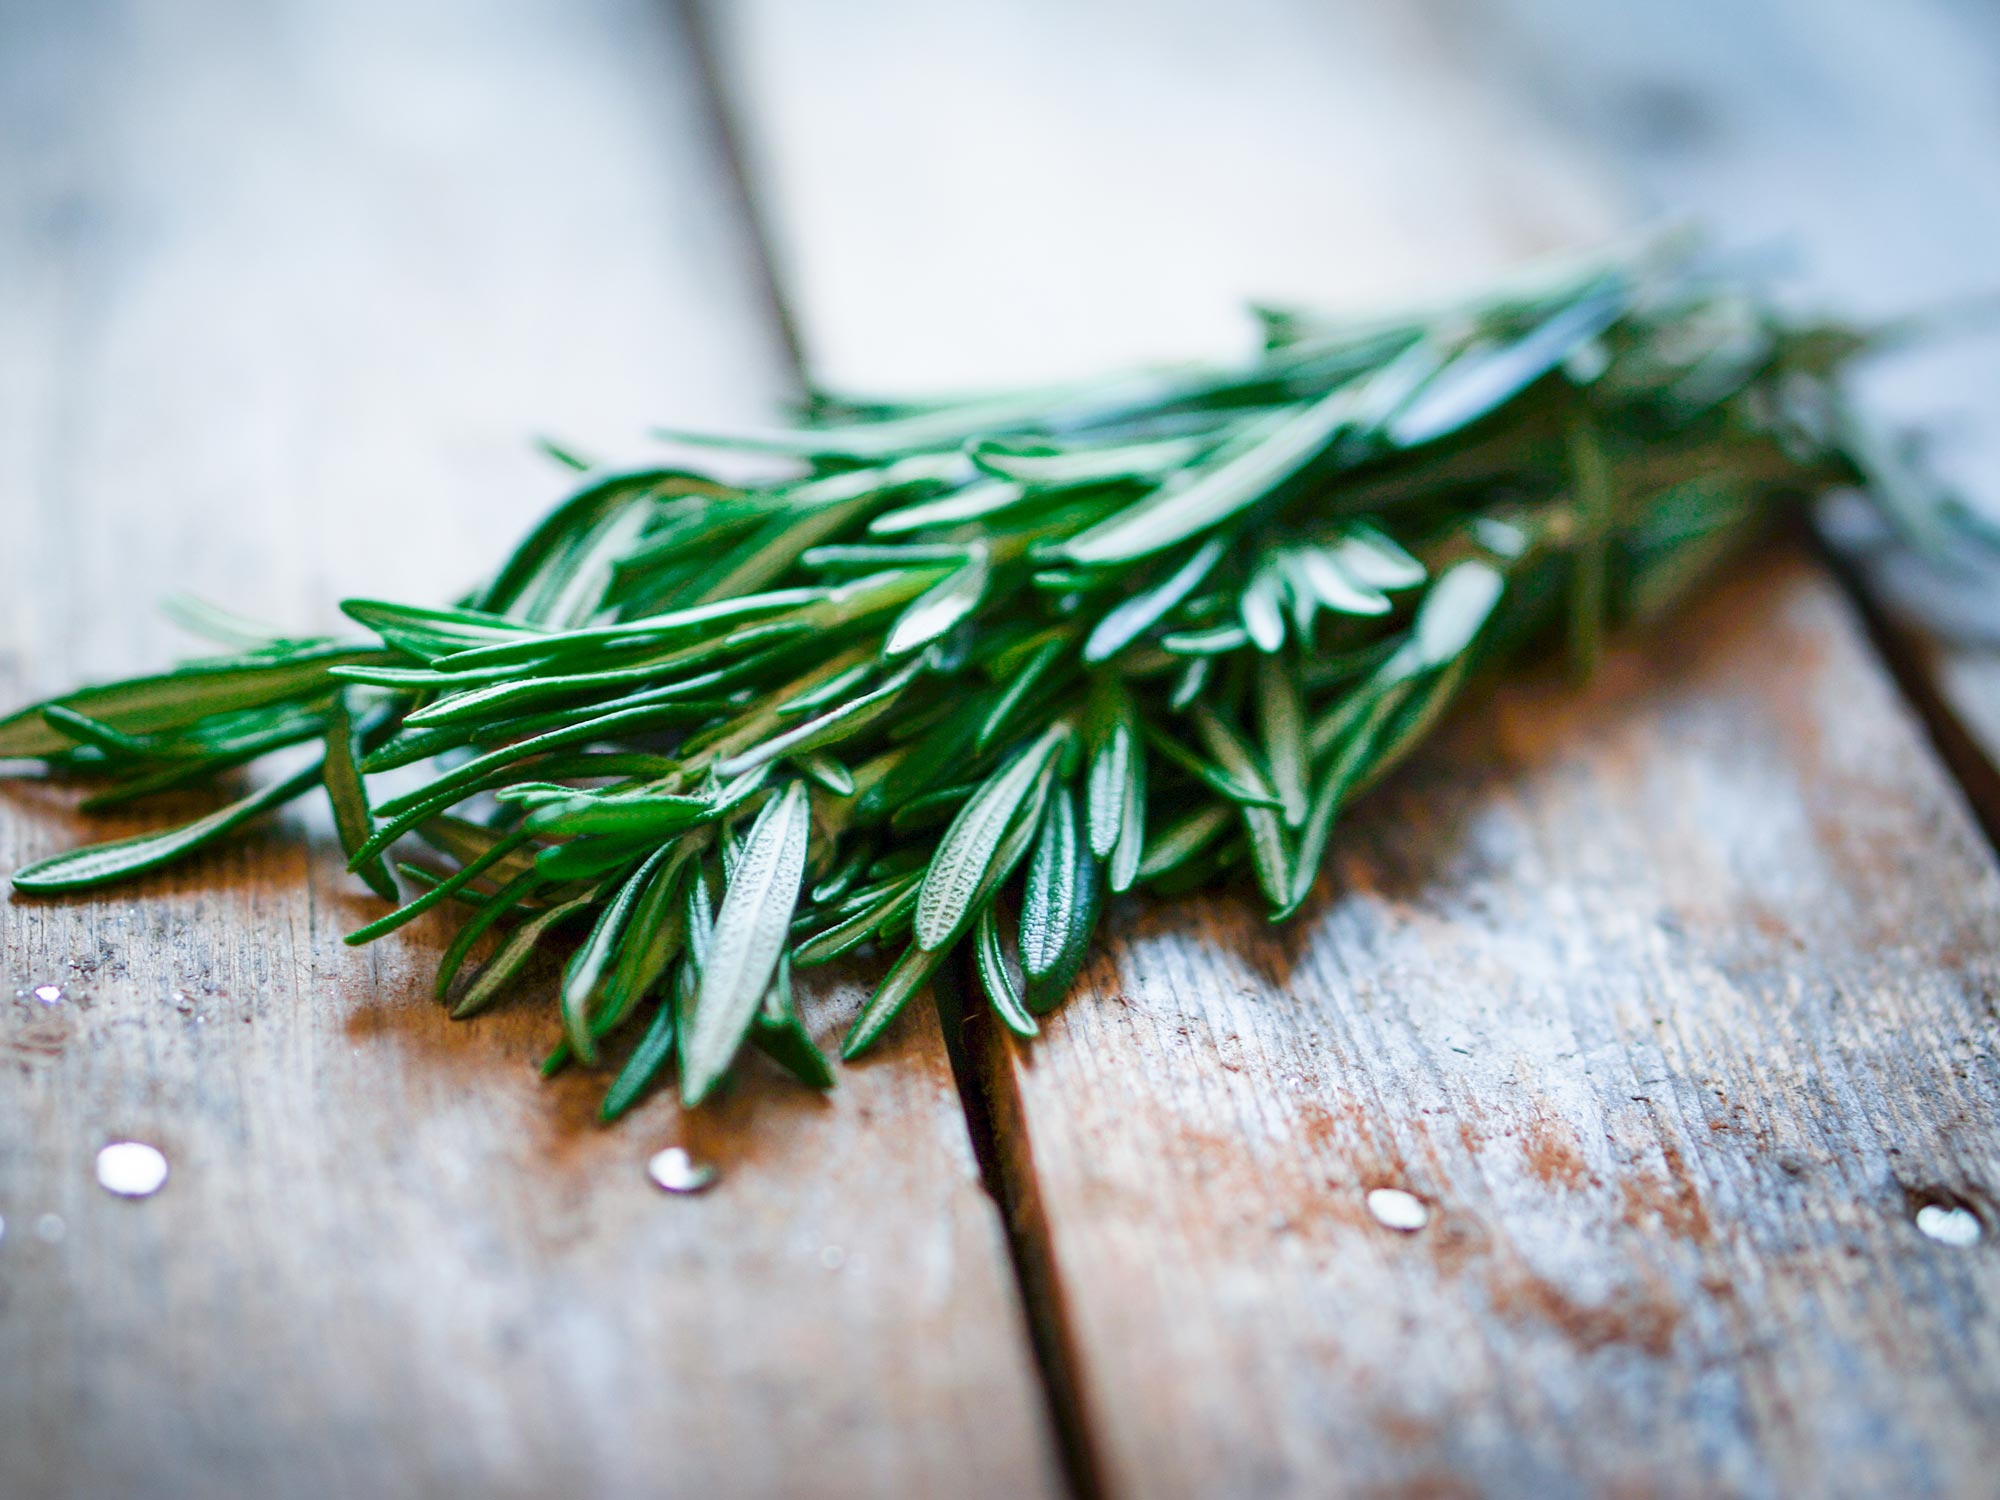 For a brain boost, stop and smell the rosemary